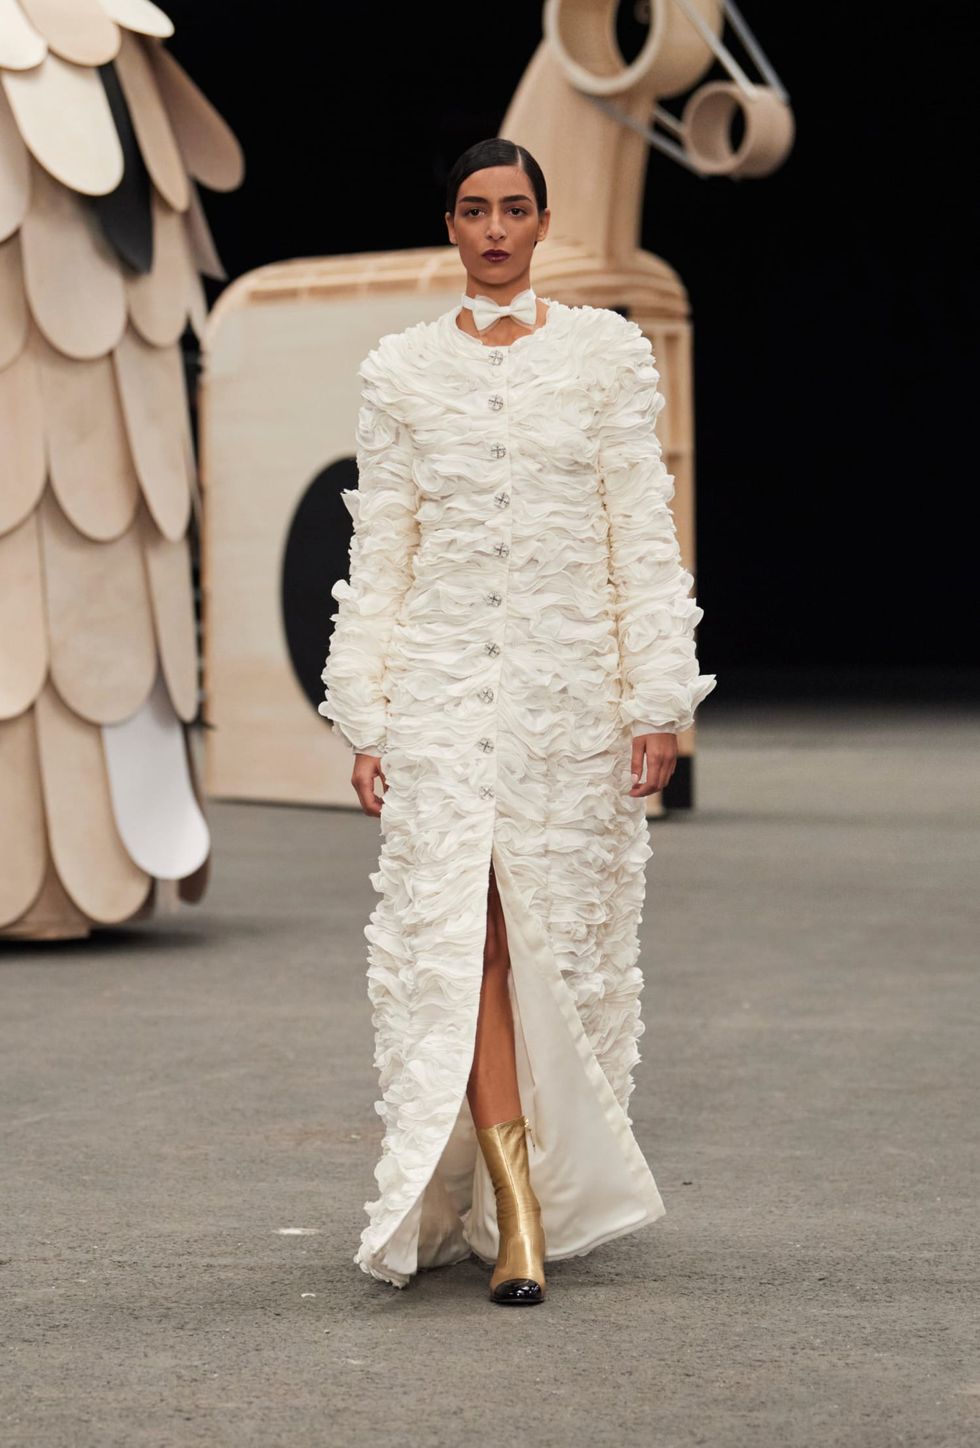 Paris is synonymous with Chanel, and the two came together at the Grand Palais Éphémère in Paris